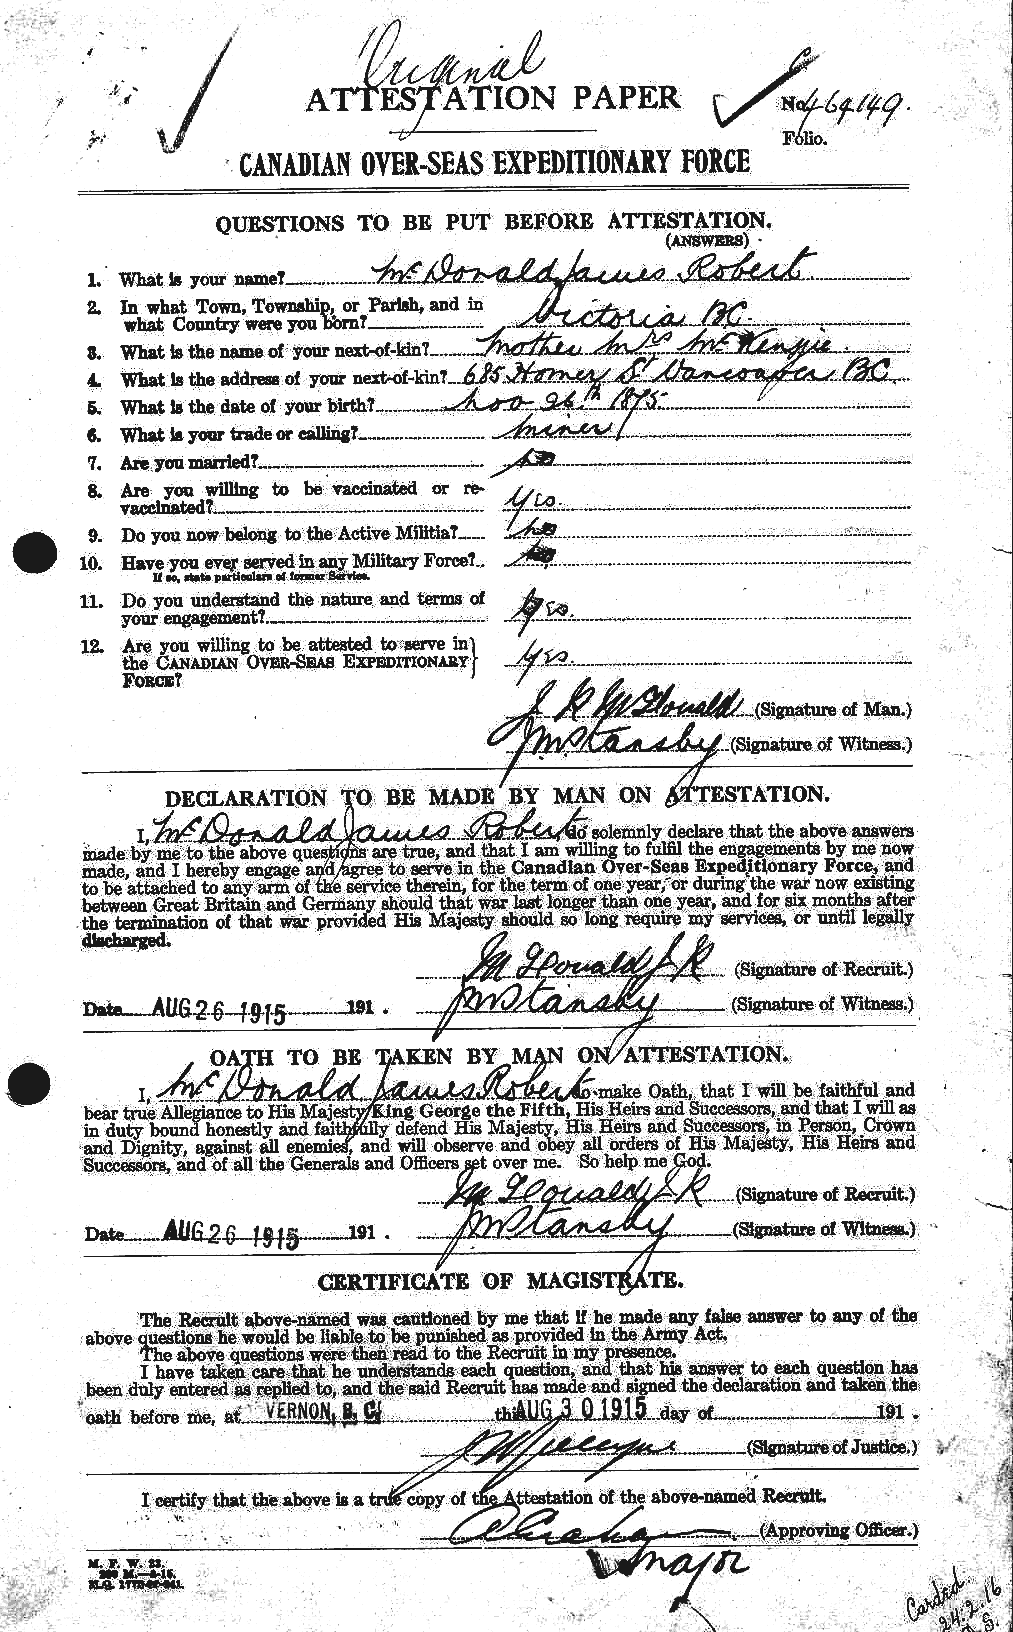 Personnel Records of the First World War - CEF 522933a